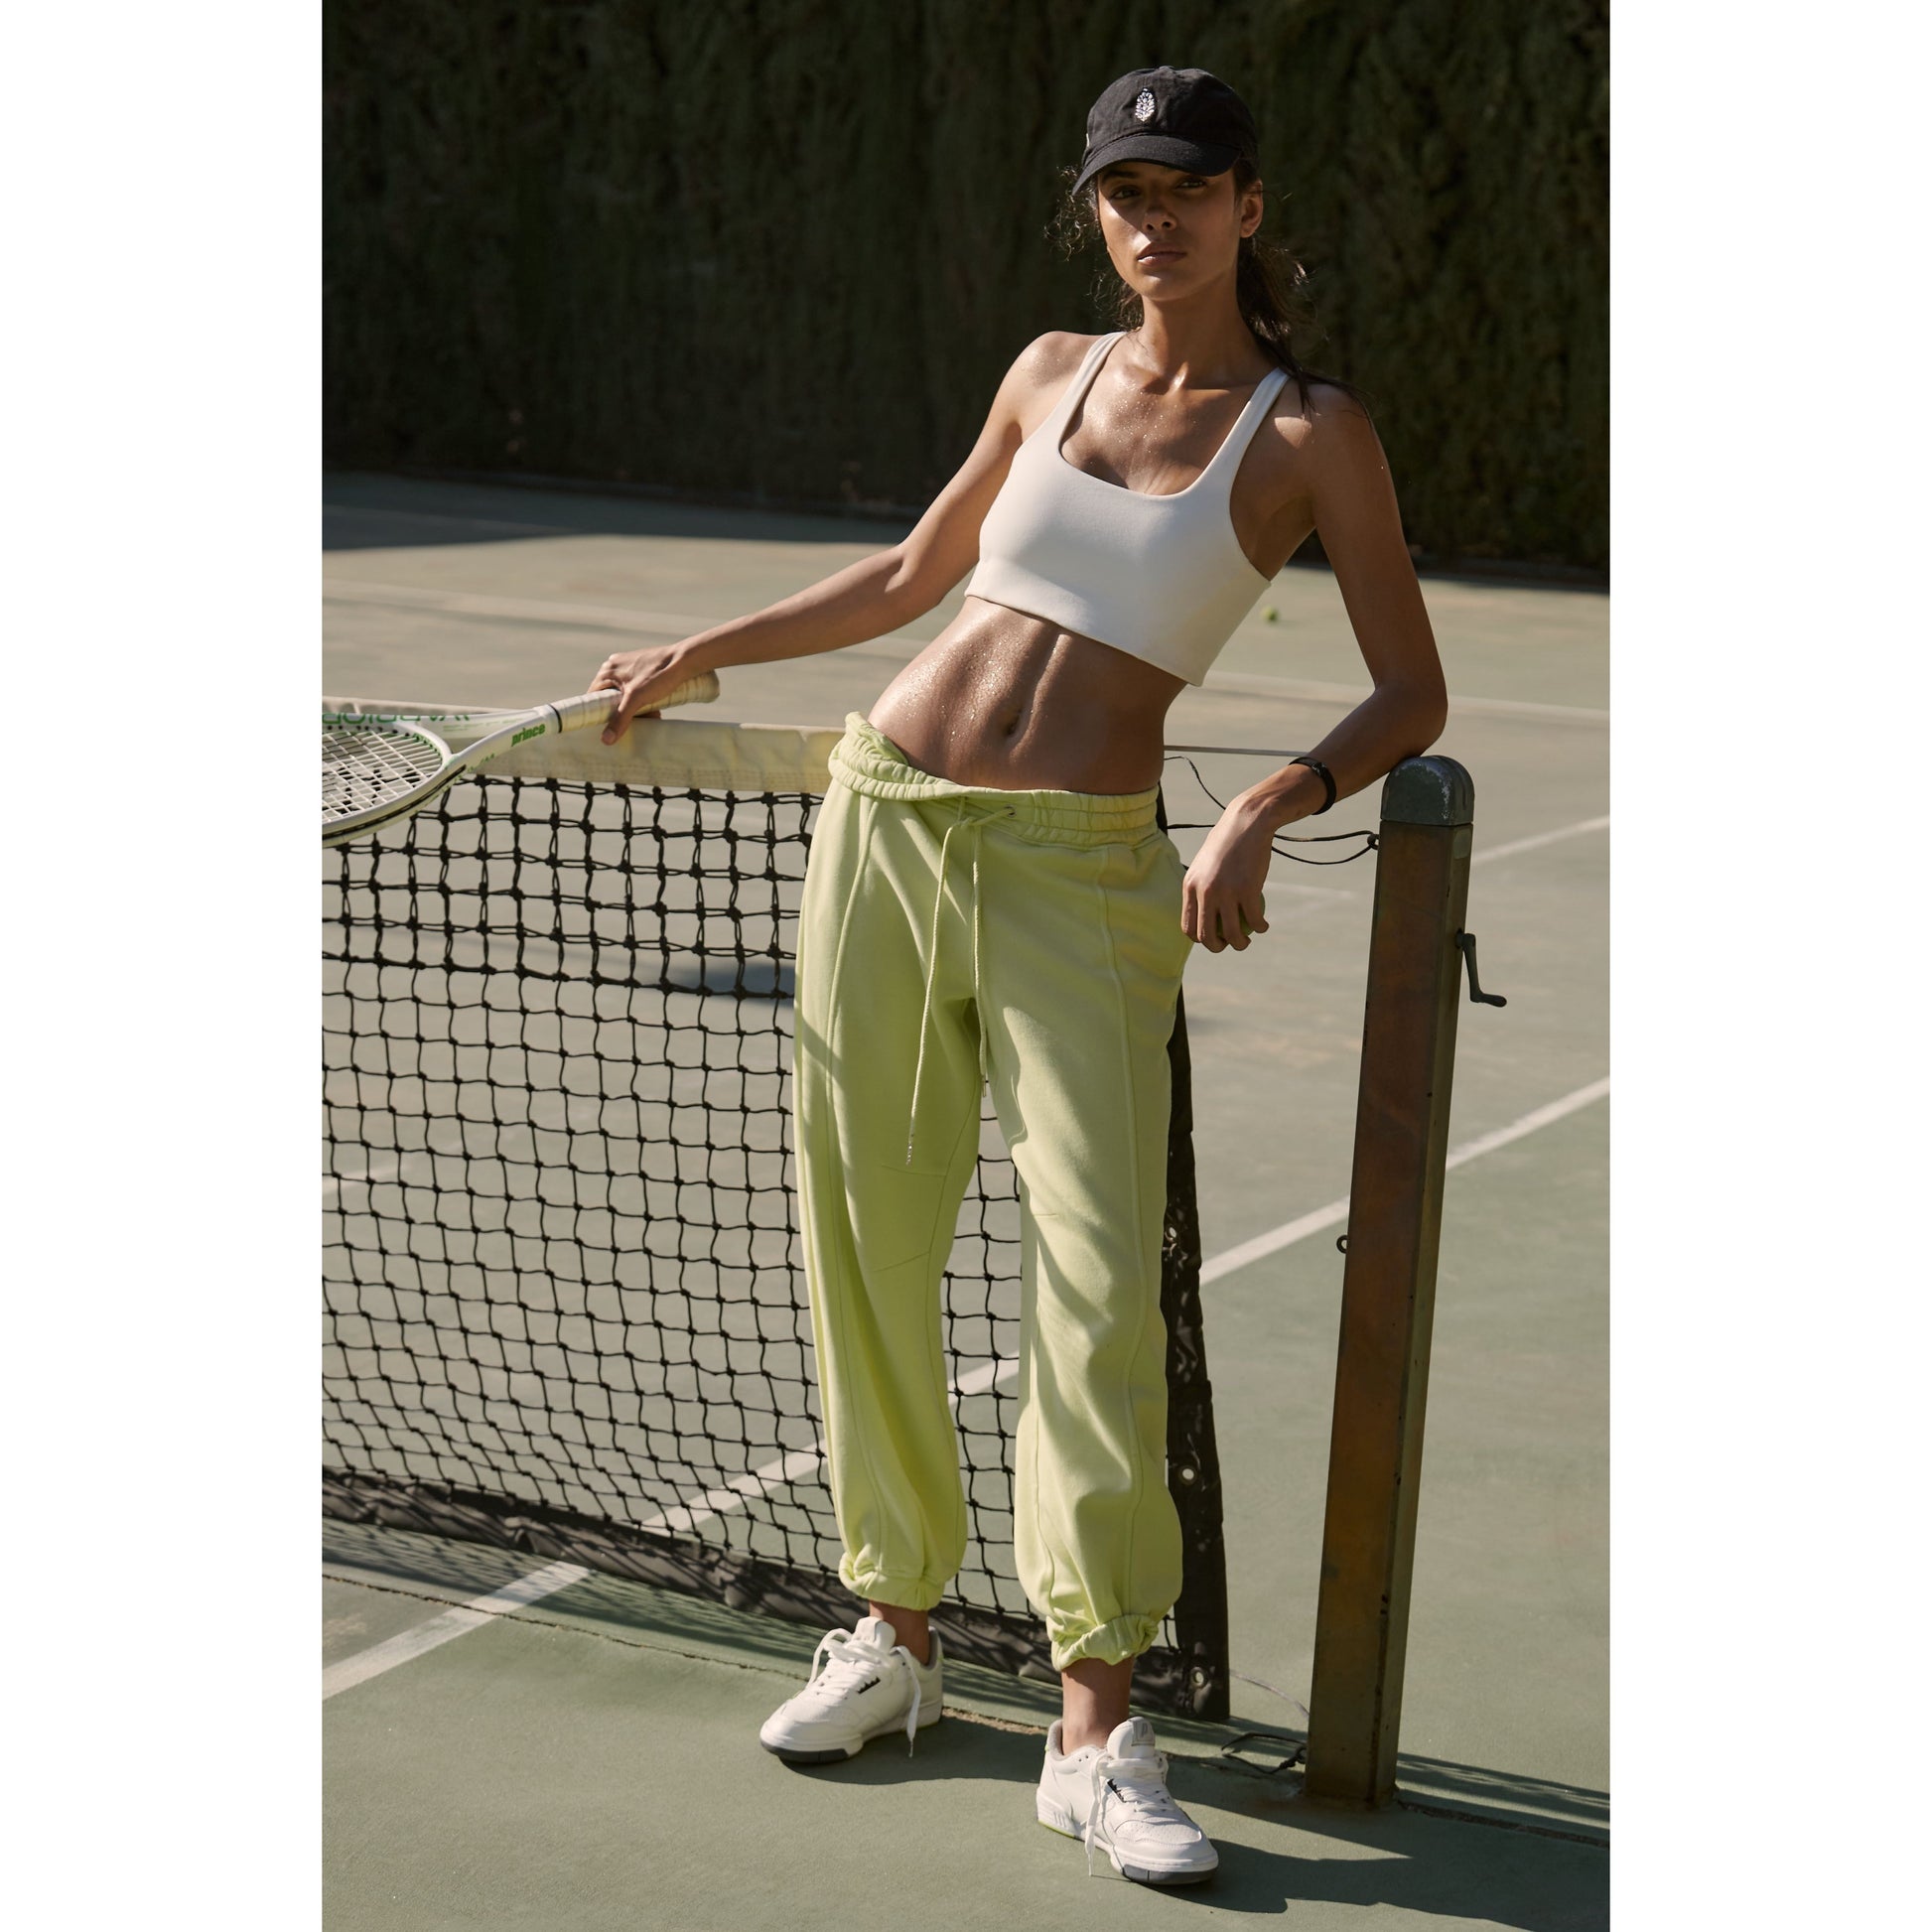 A woman in sporty attire stands beside a tennis net, holding a racket, wearing the Free People Movement Never Better SQ Neck Bra in White, lime green track pants, and a black cap.